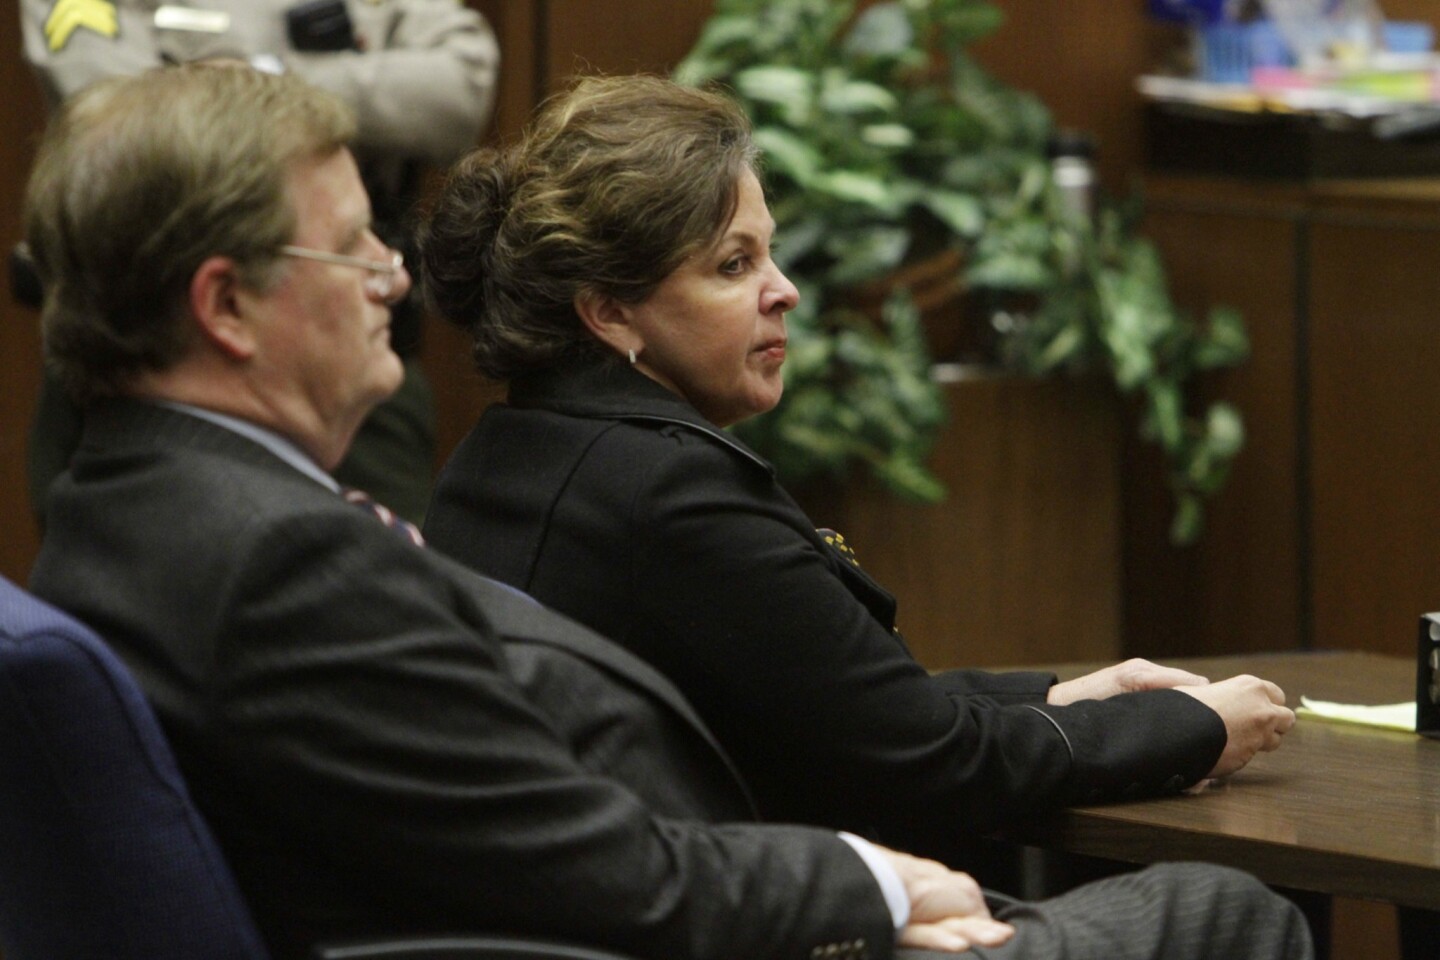 Angela Spaccia, right, Bell's former second in command, sits in a a downtown Los Angeles courtroom beside her attorney, Harland Braun, the day a jury reached verdicts in her case.